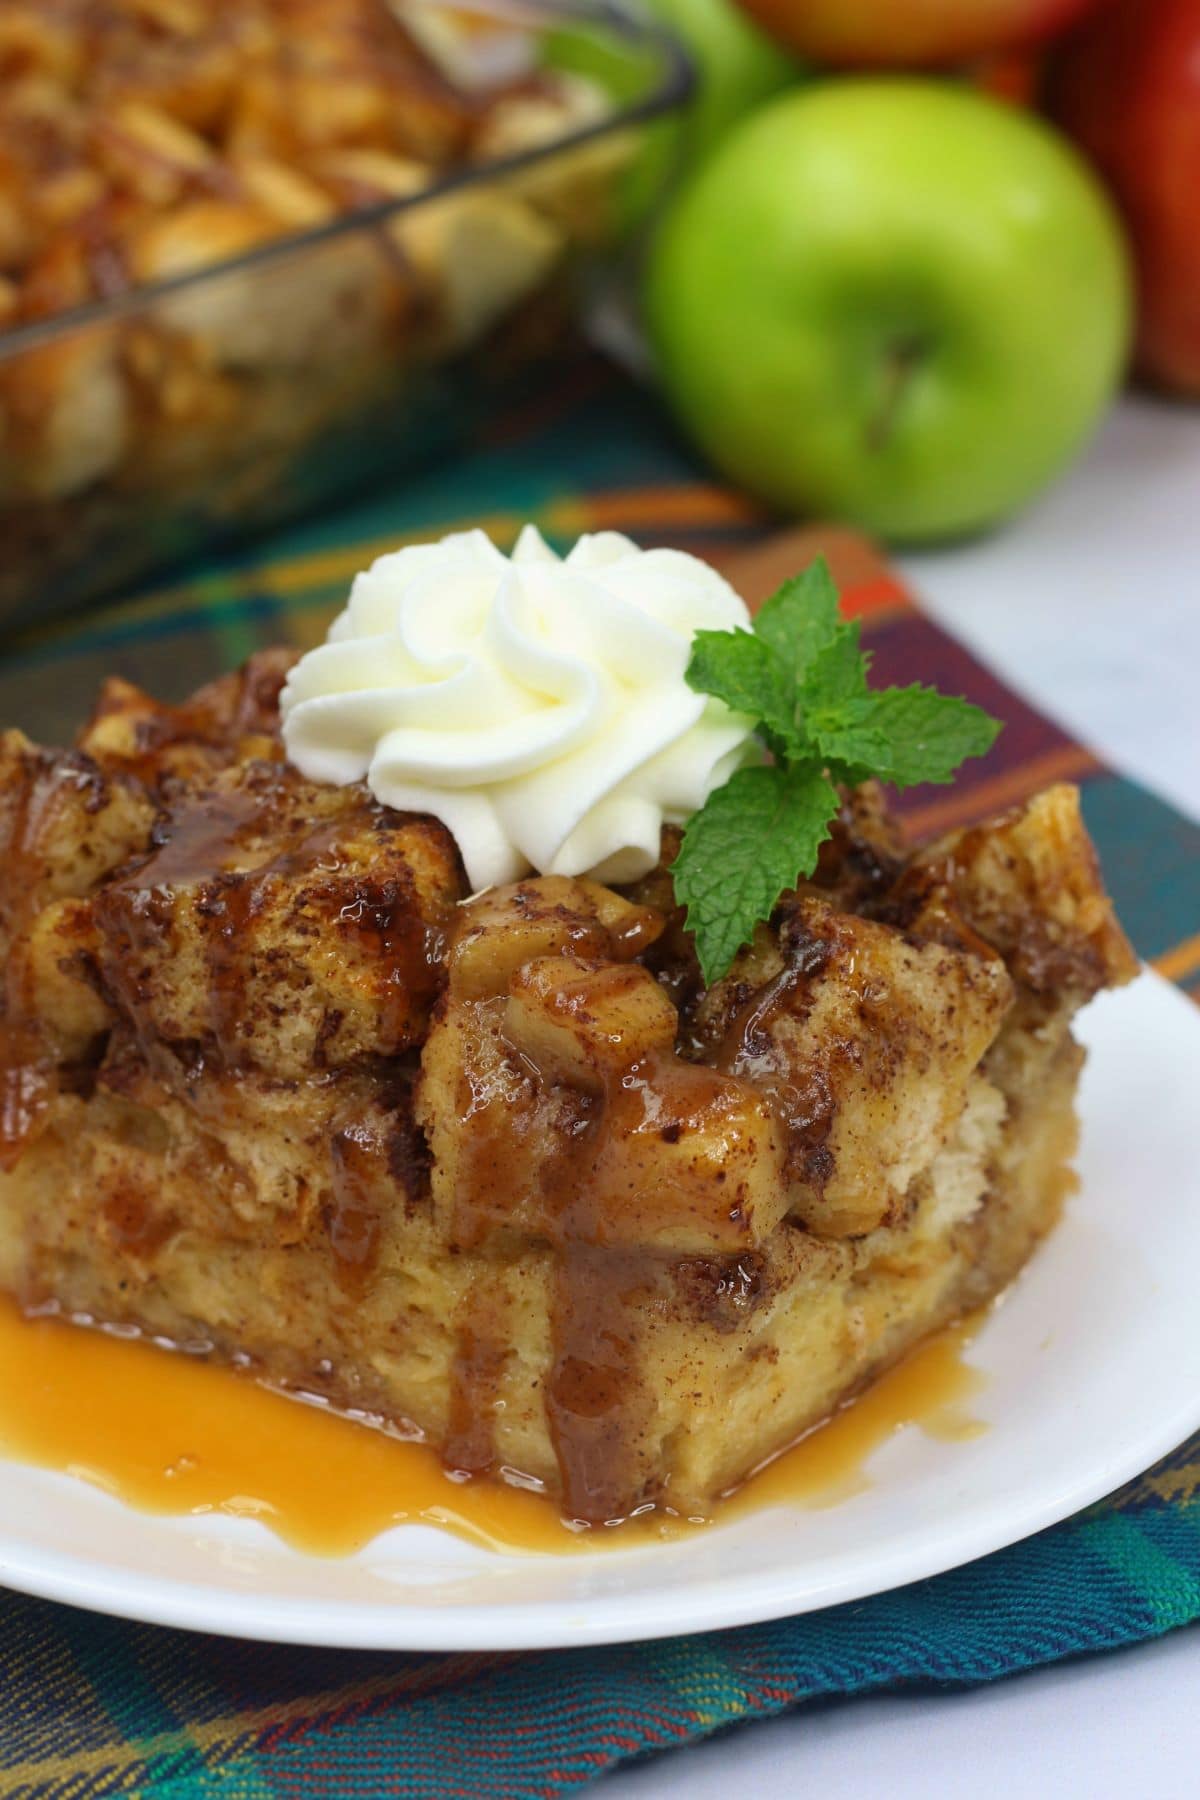 Apple bread pudding with whipped cream on top on a white plate